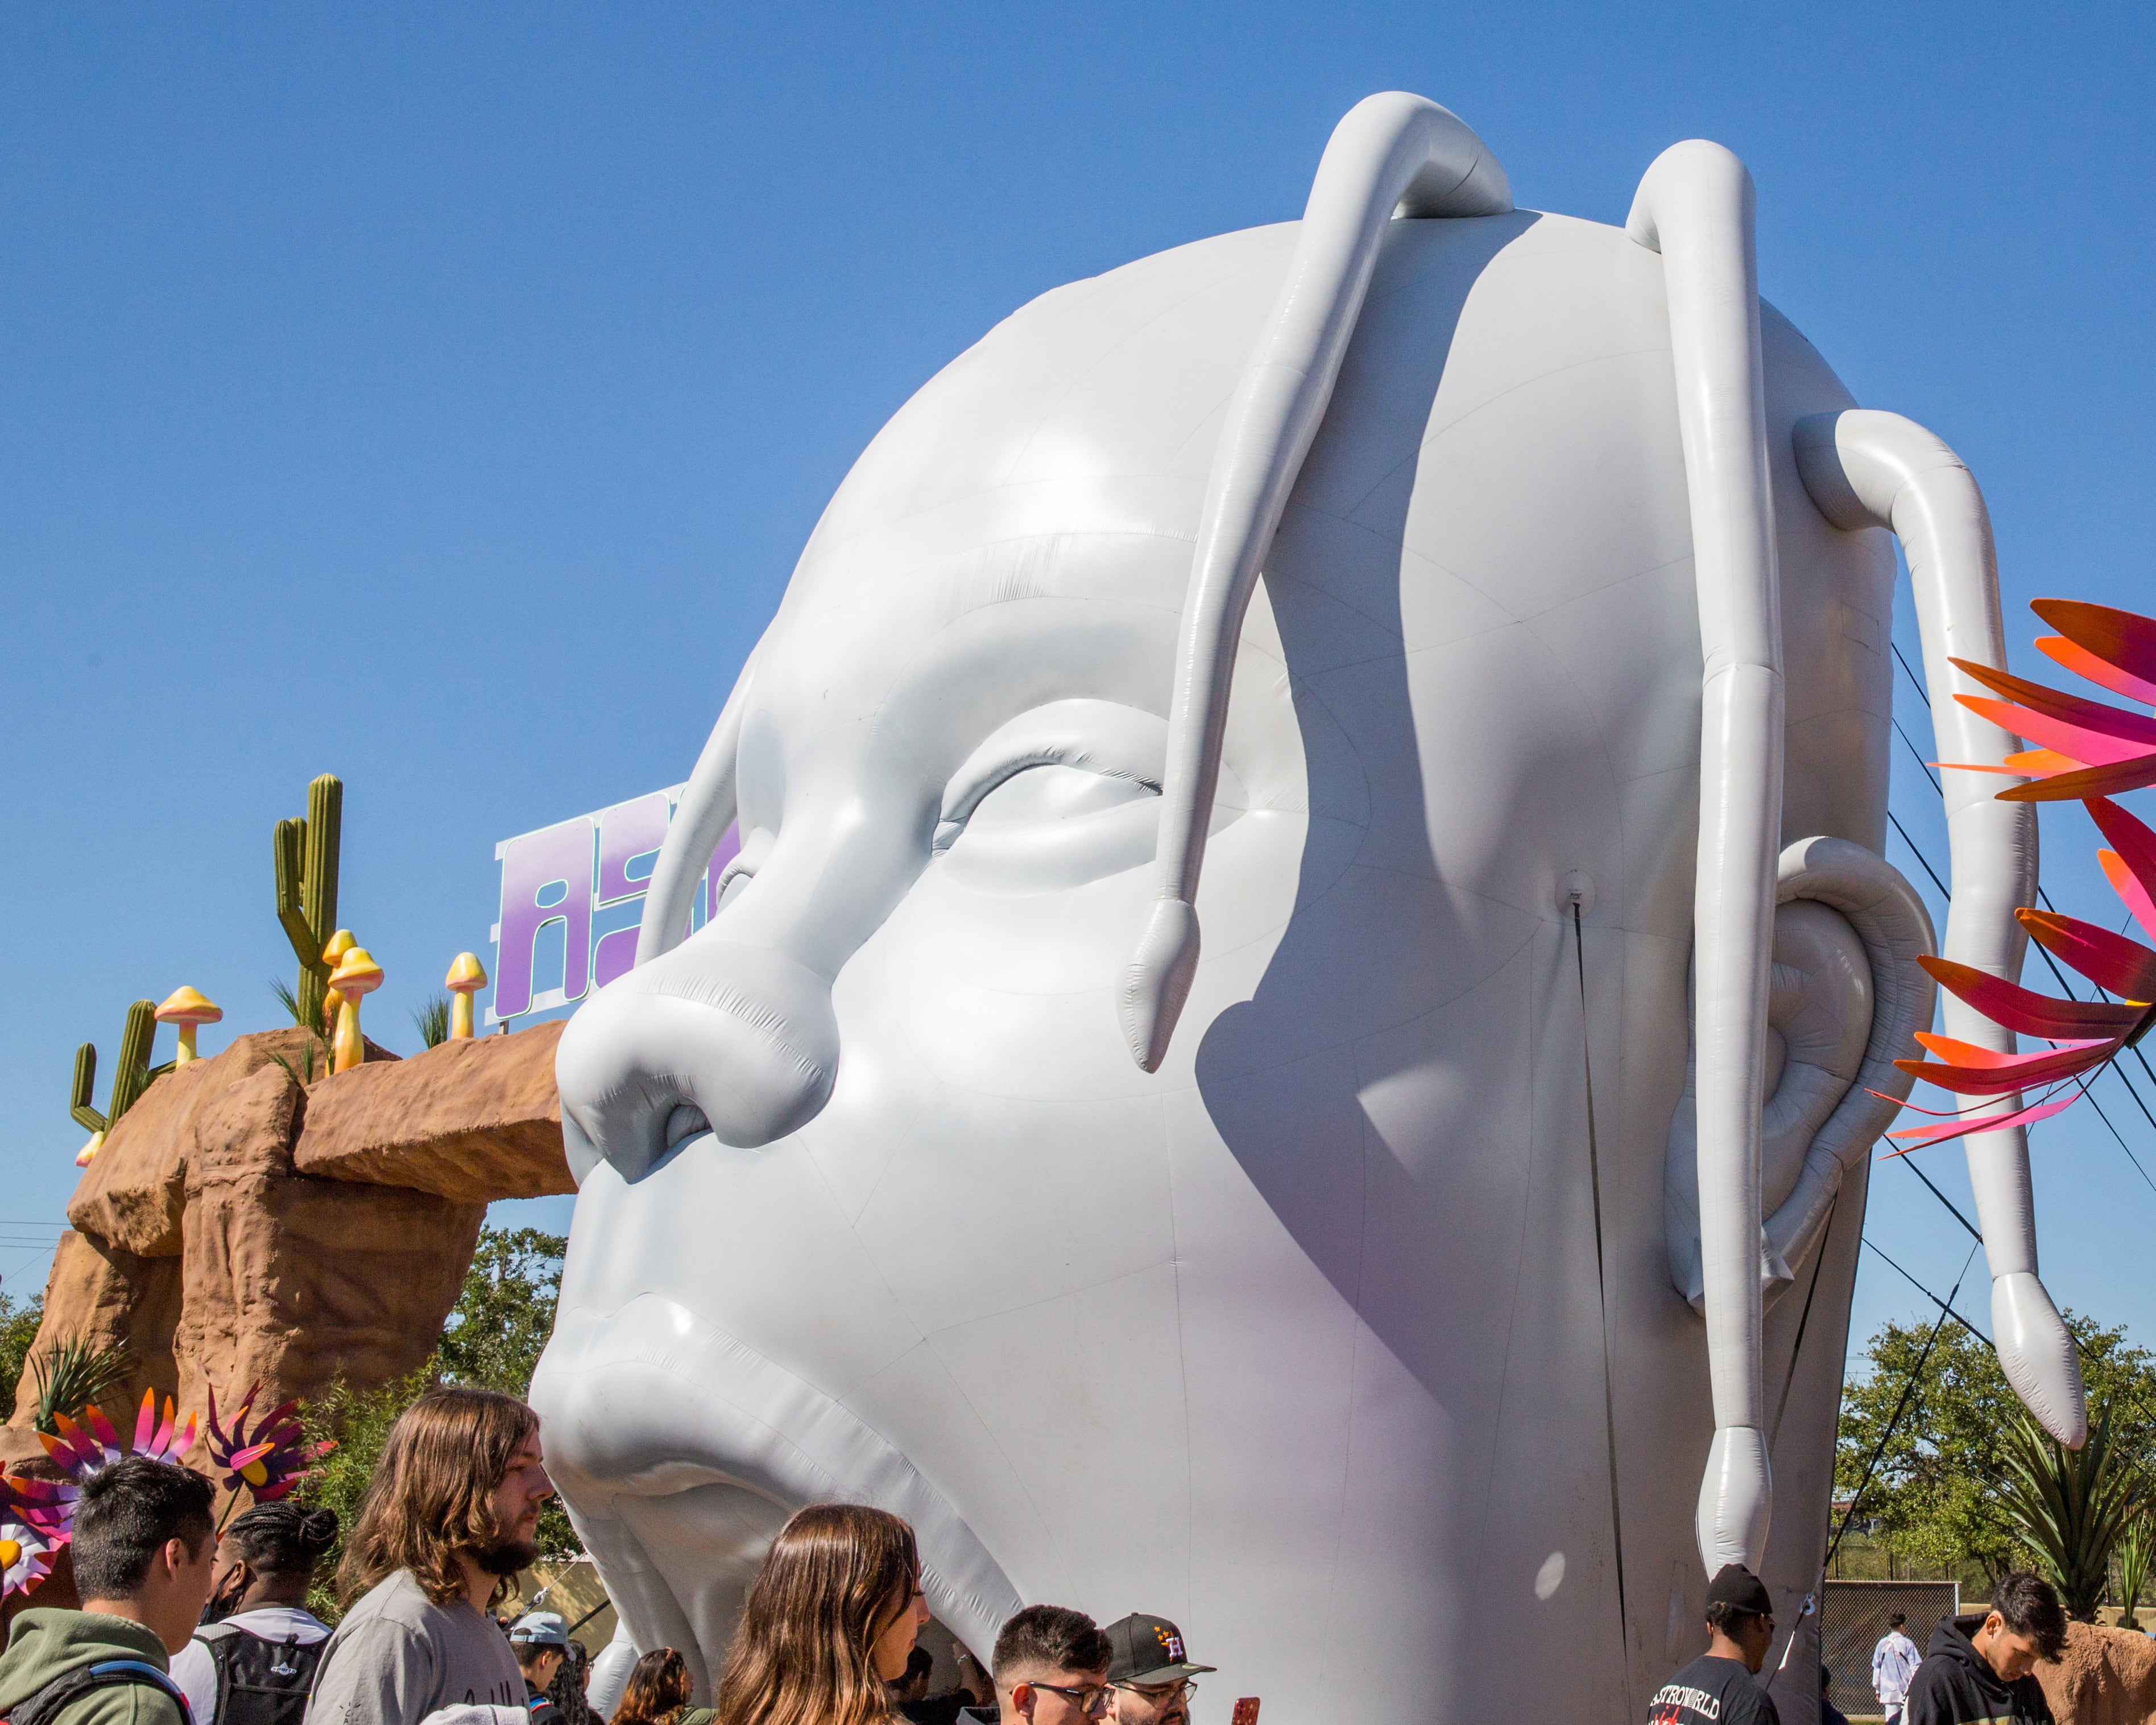 Entrance to the Astroworld Festival, which some conspiracy theories have compared to a figure painted by Hieronymus Bosch.